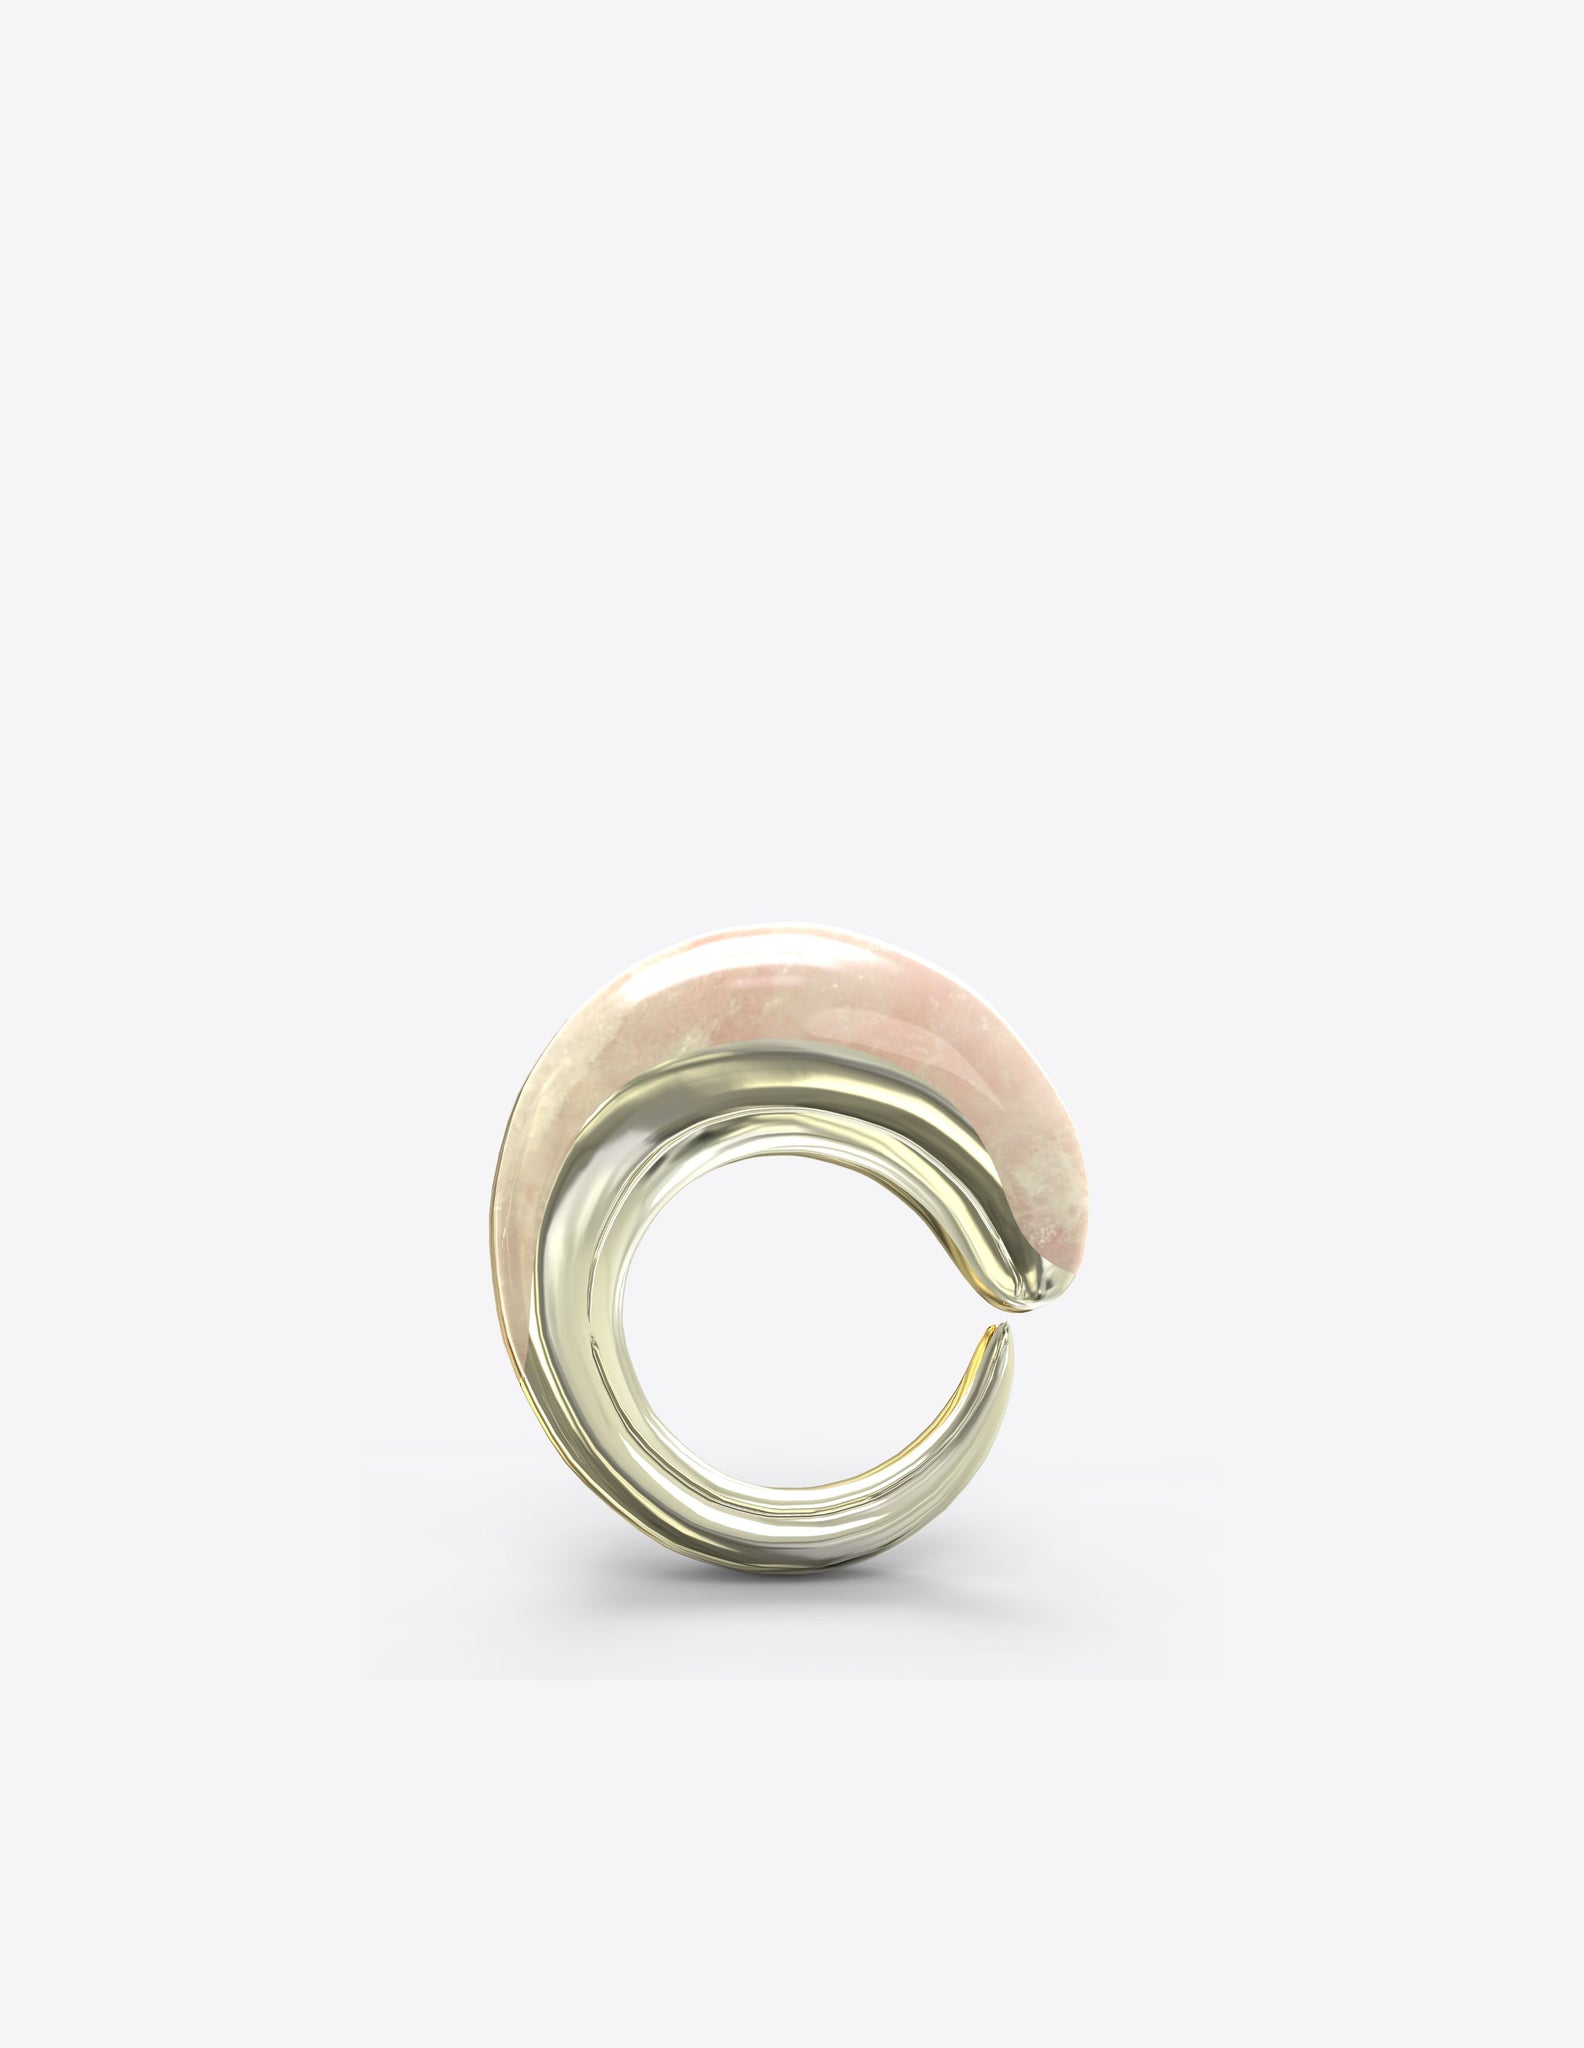 Khartoum II Ring with Rose Quartz Inlay in Sterling Silver